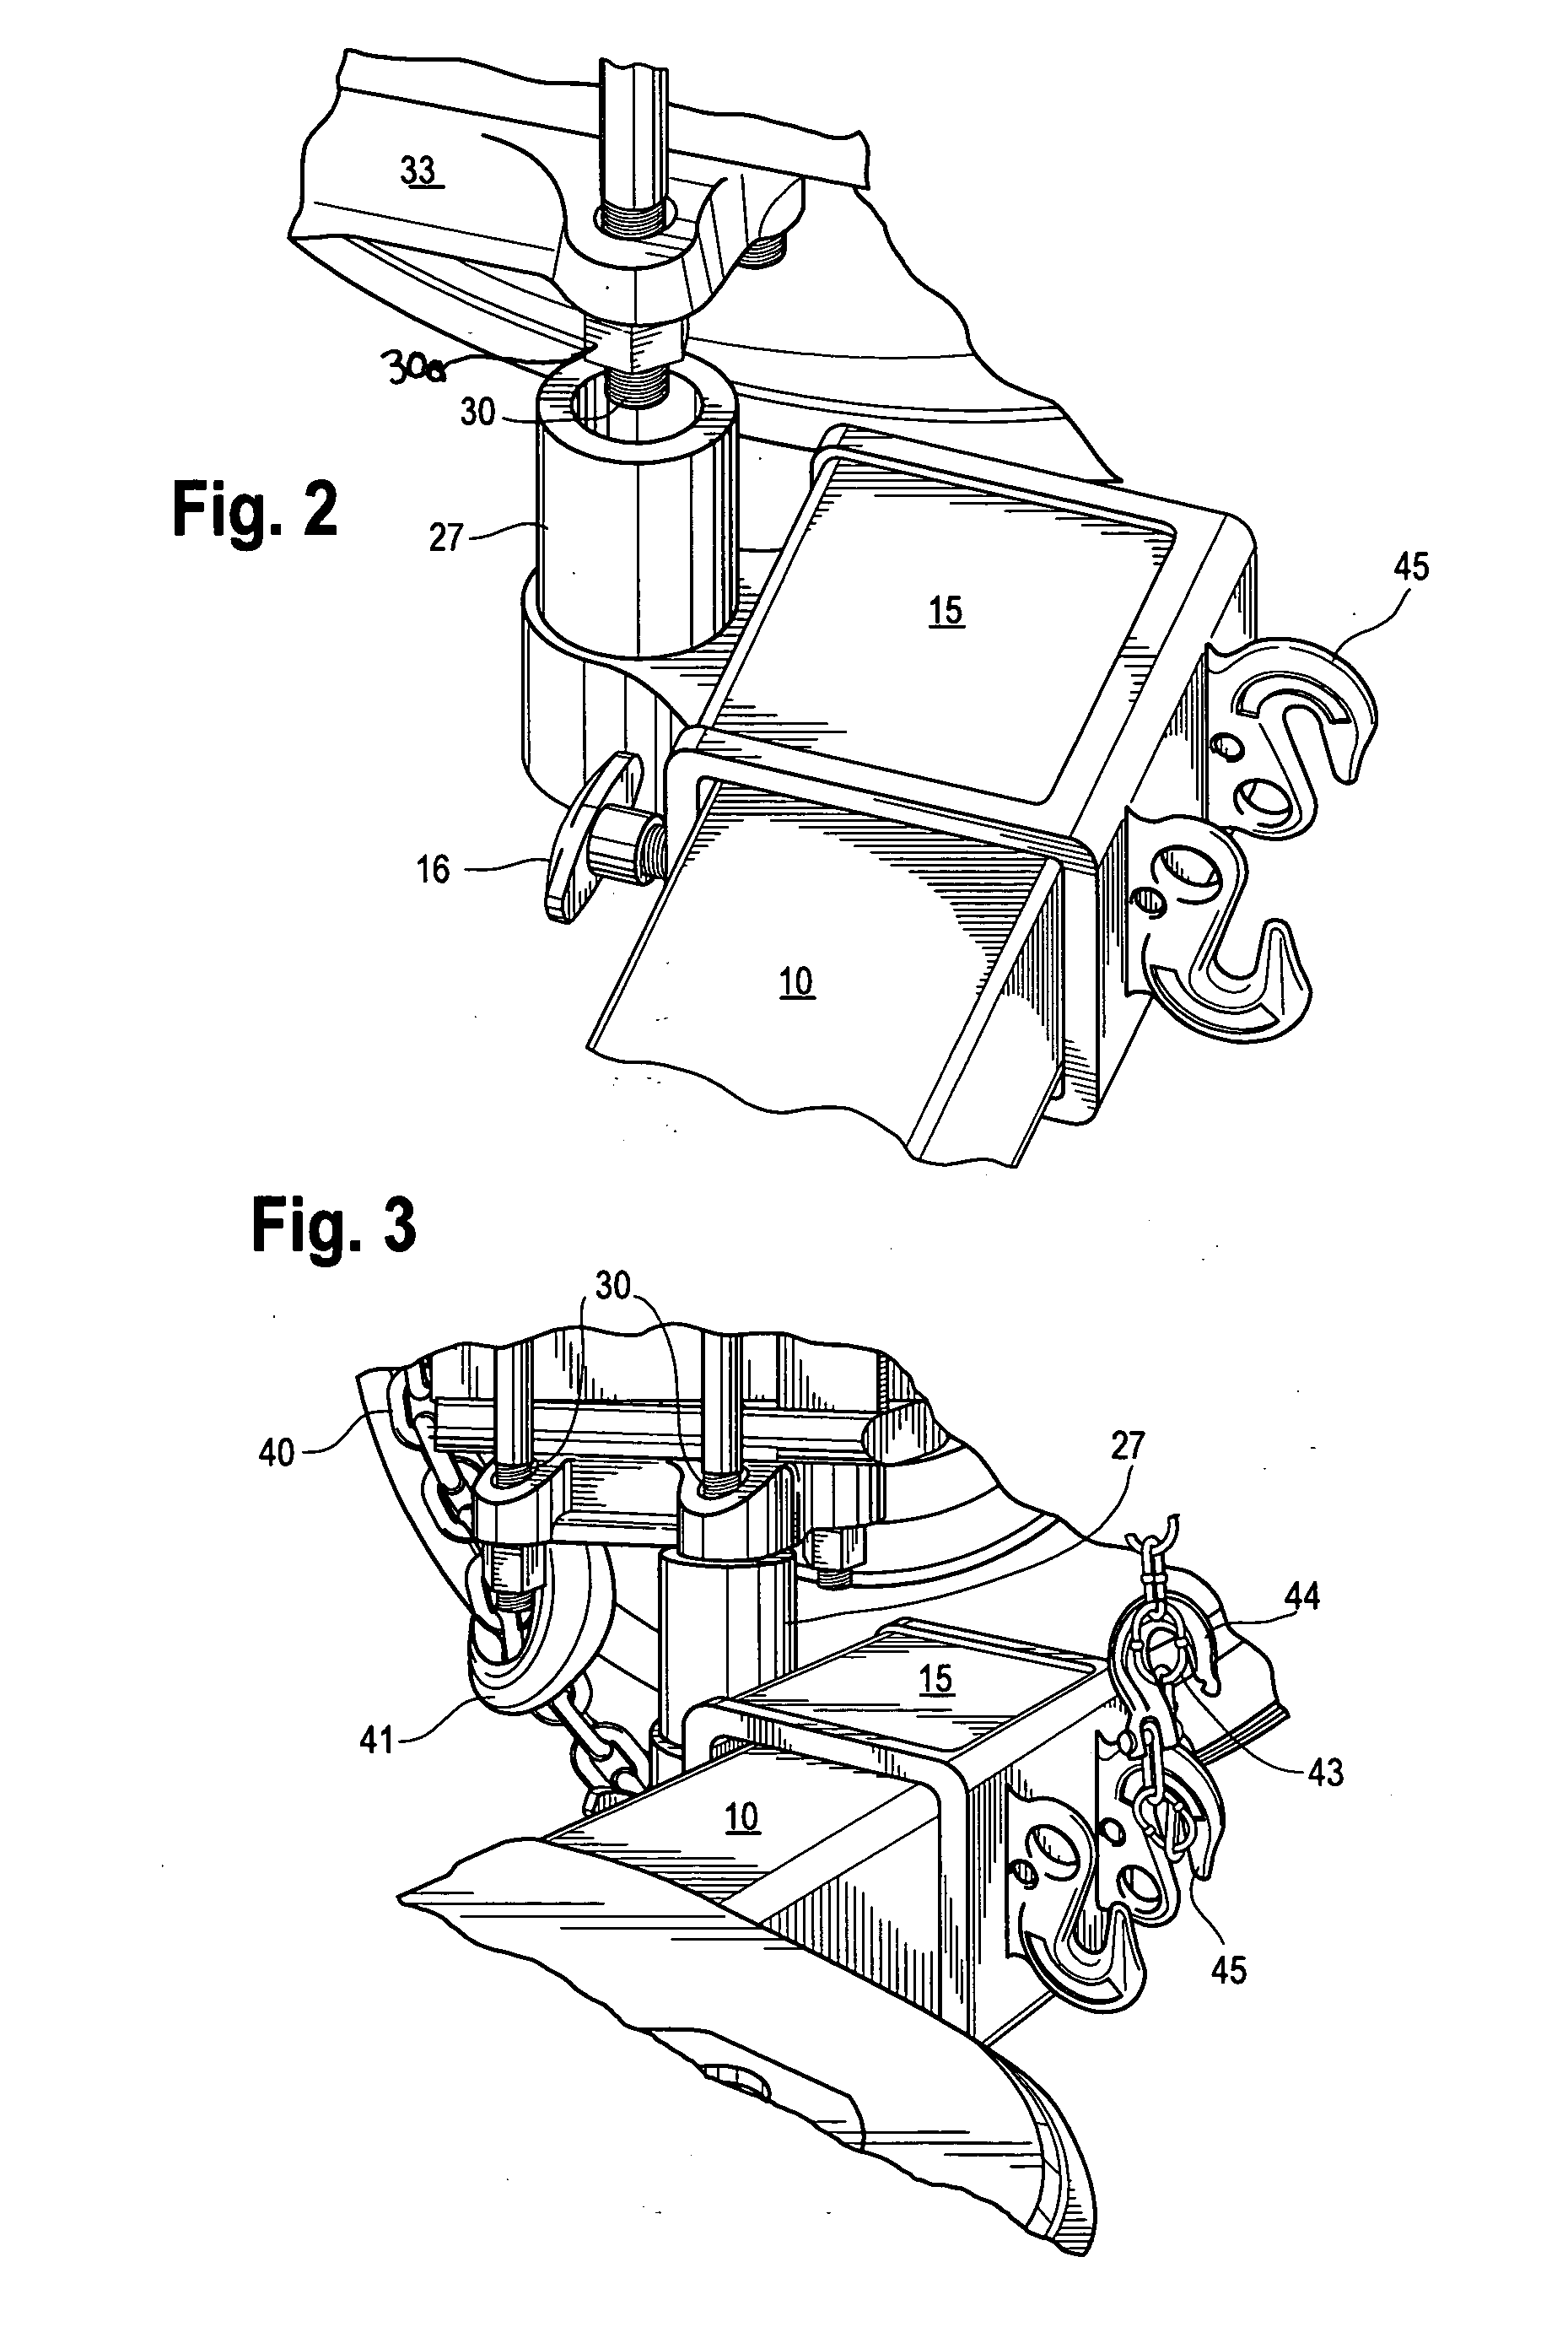 Heavy duty lift adaptor for vehicle towing